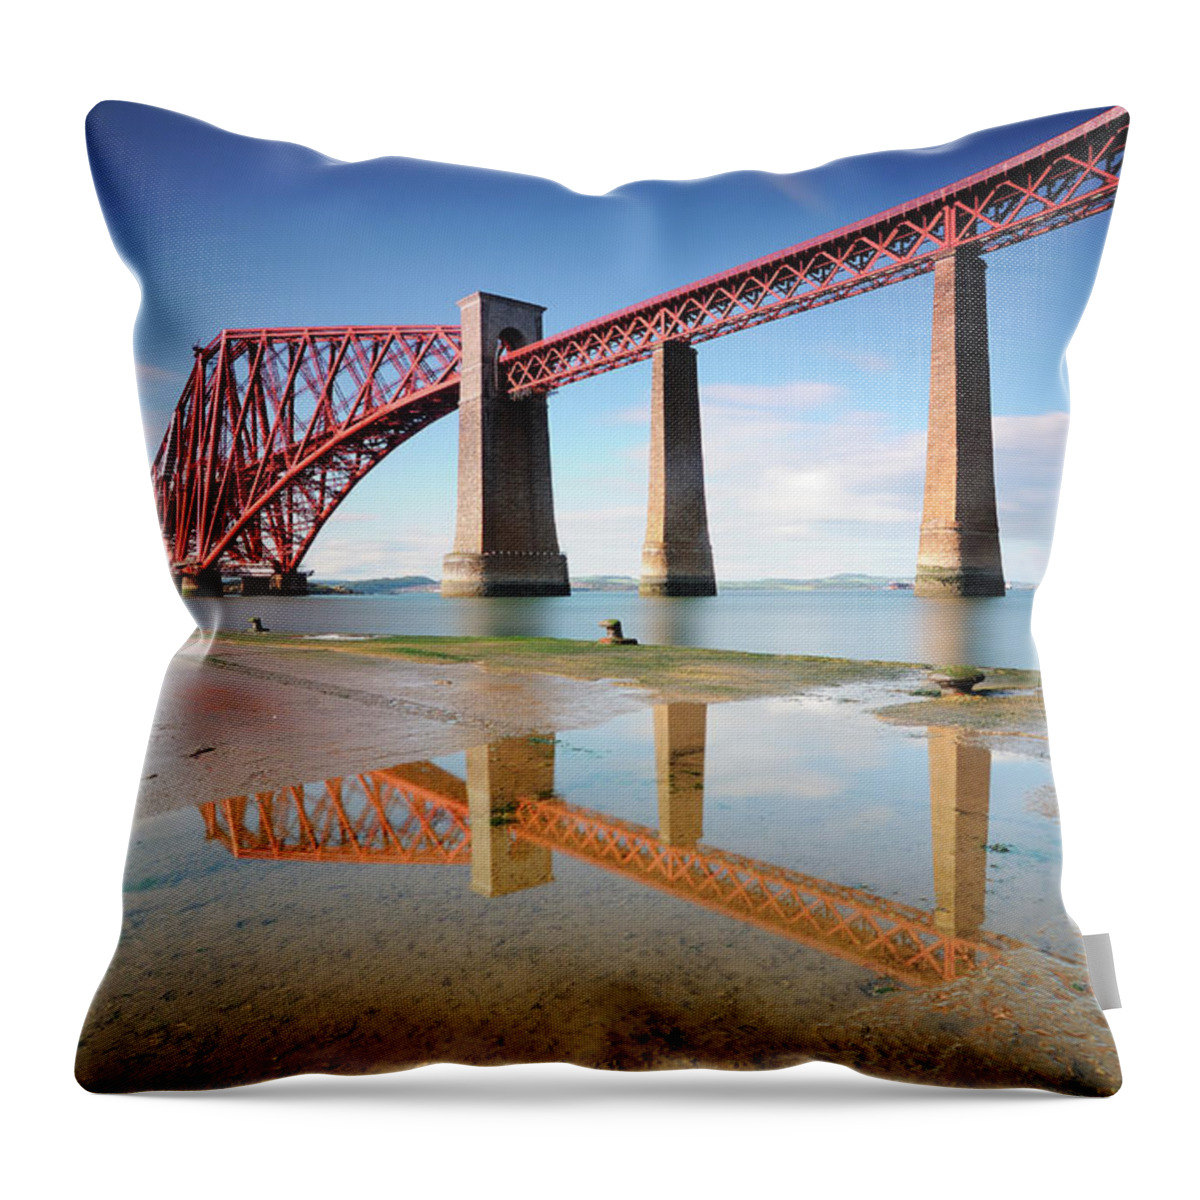 Built Structure Throw Pillow featuring the photograph Forth Rail Bridge by Stu Meech